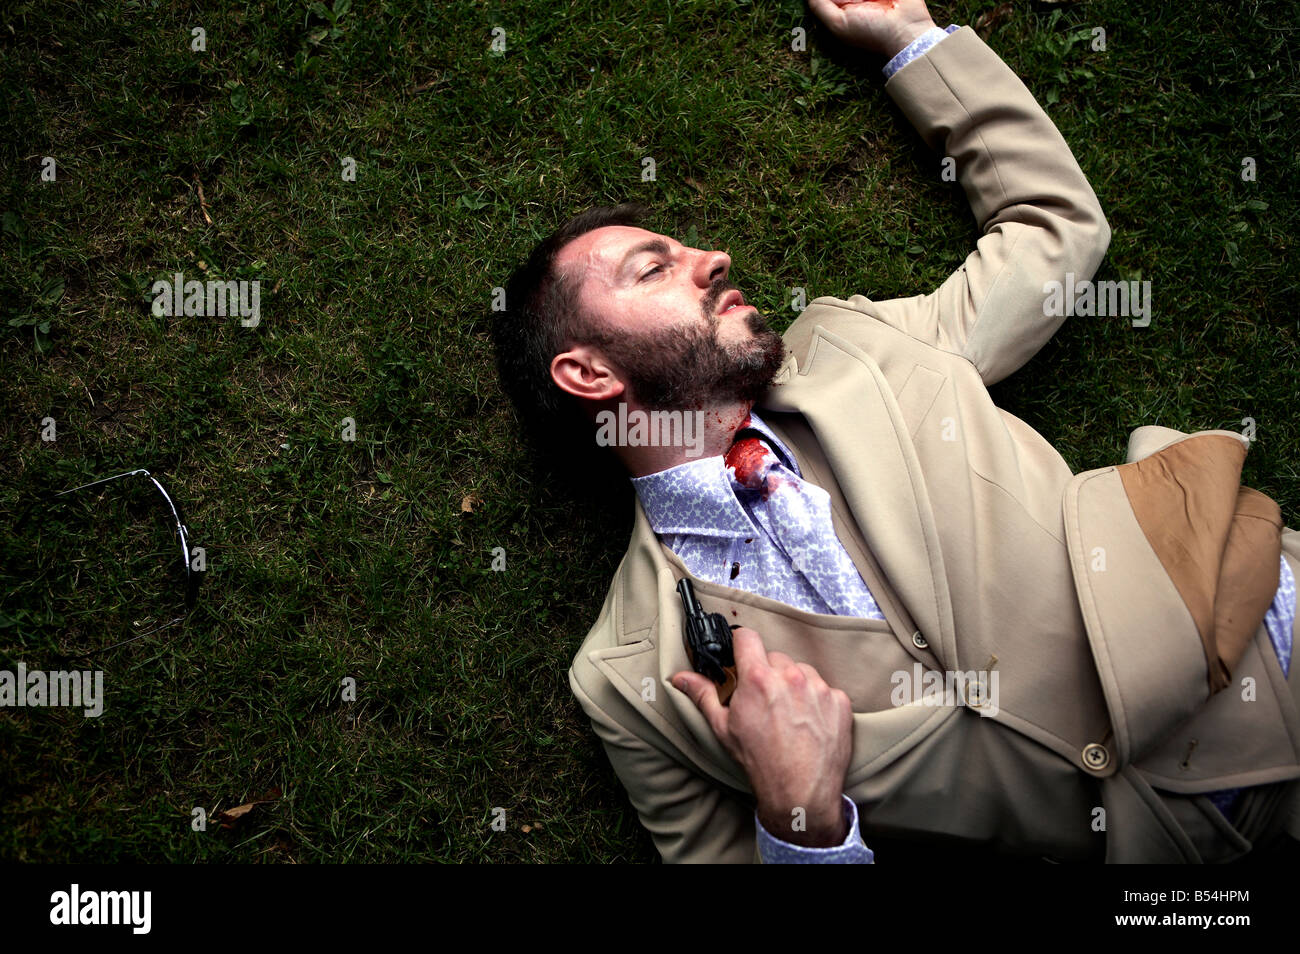 A man lies with a hand gun and blood down his face Stock Photo